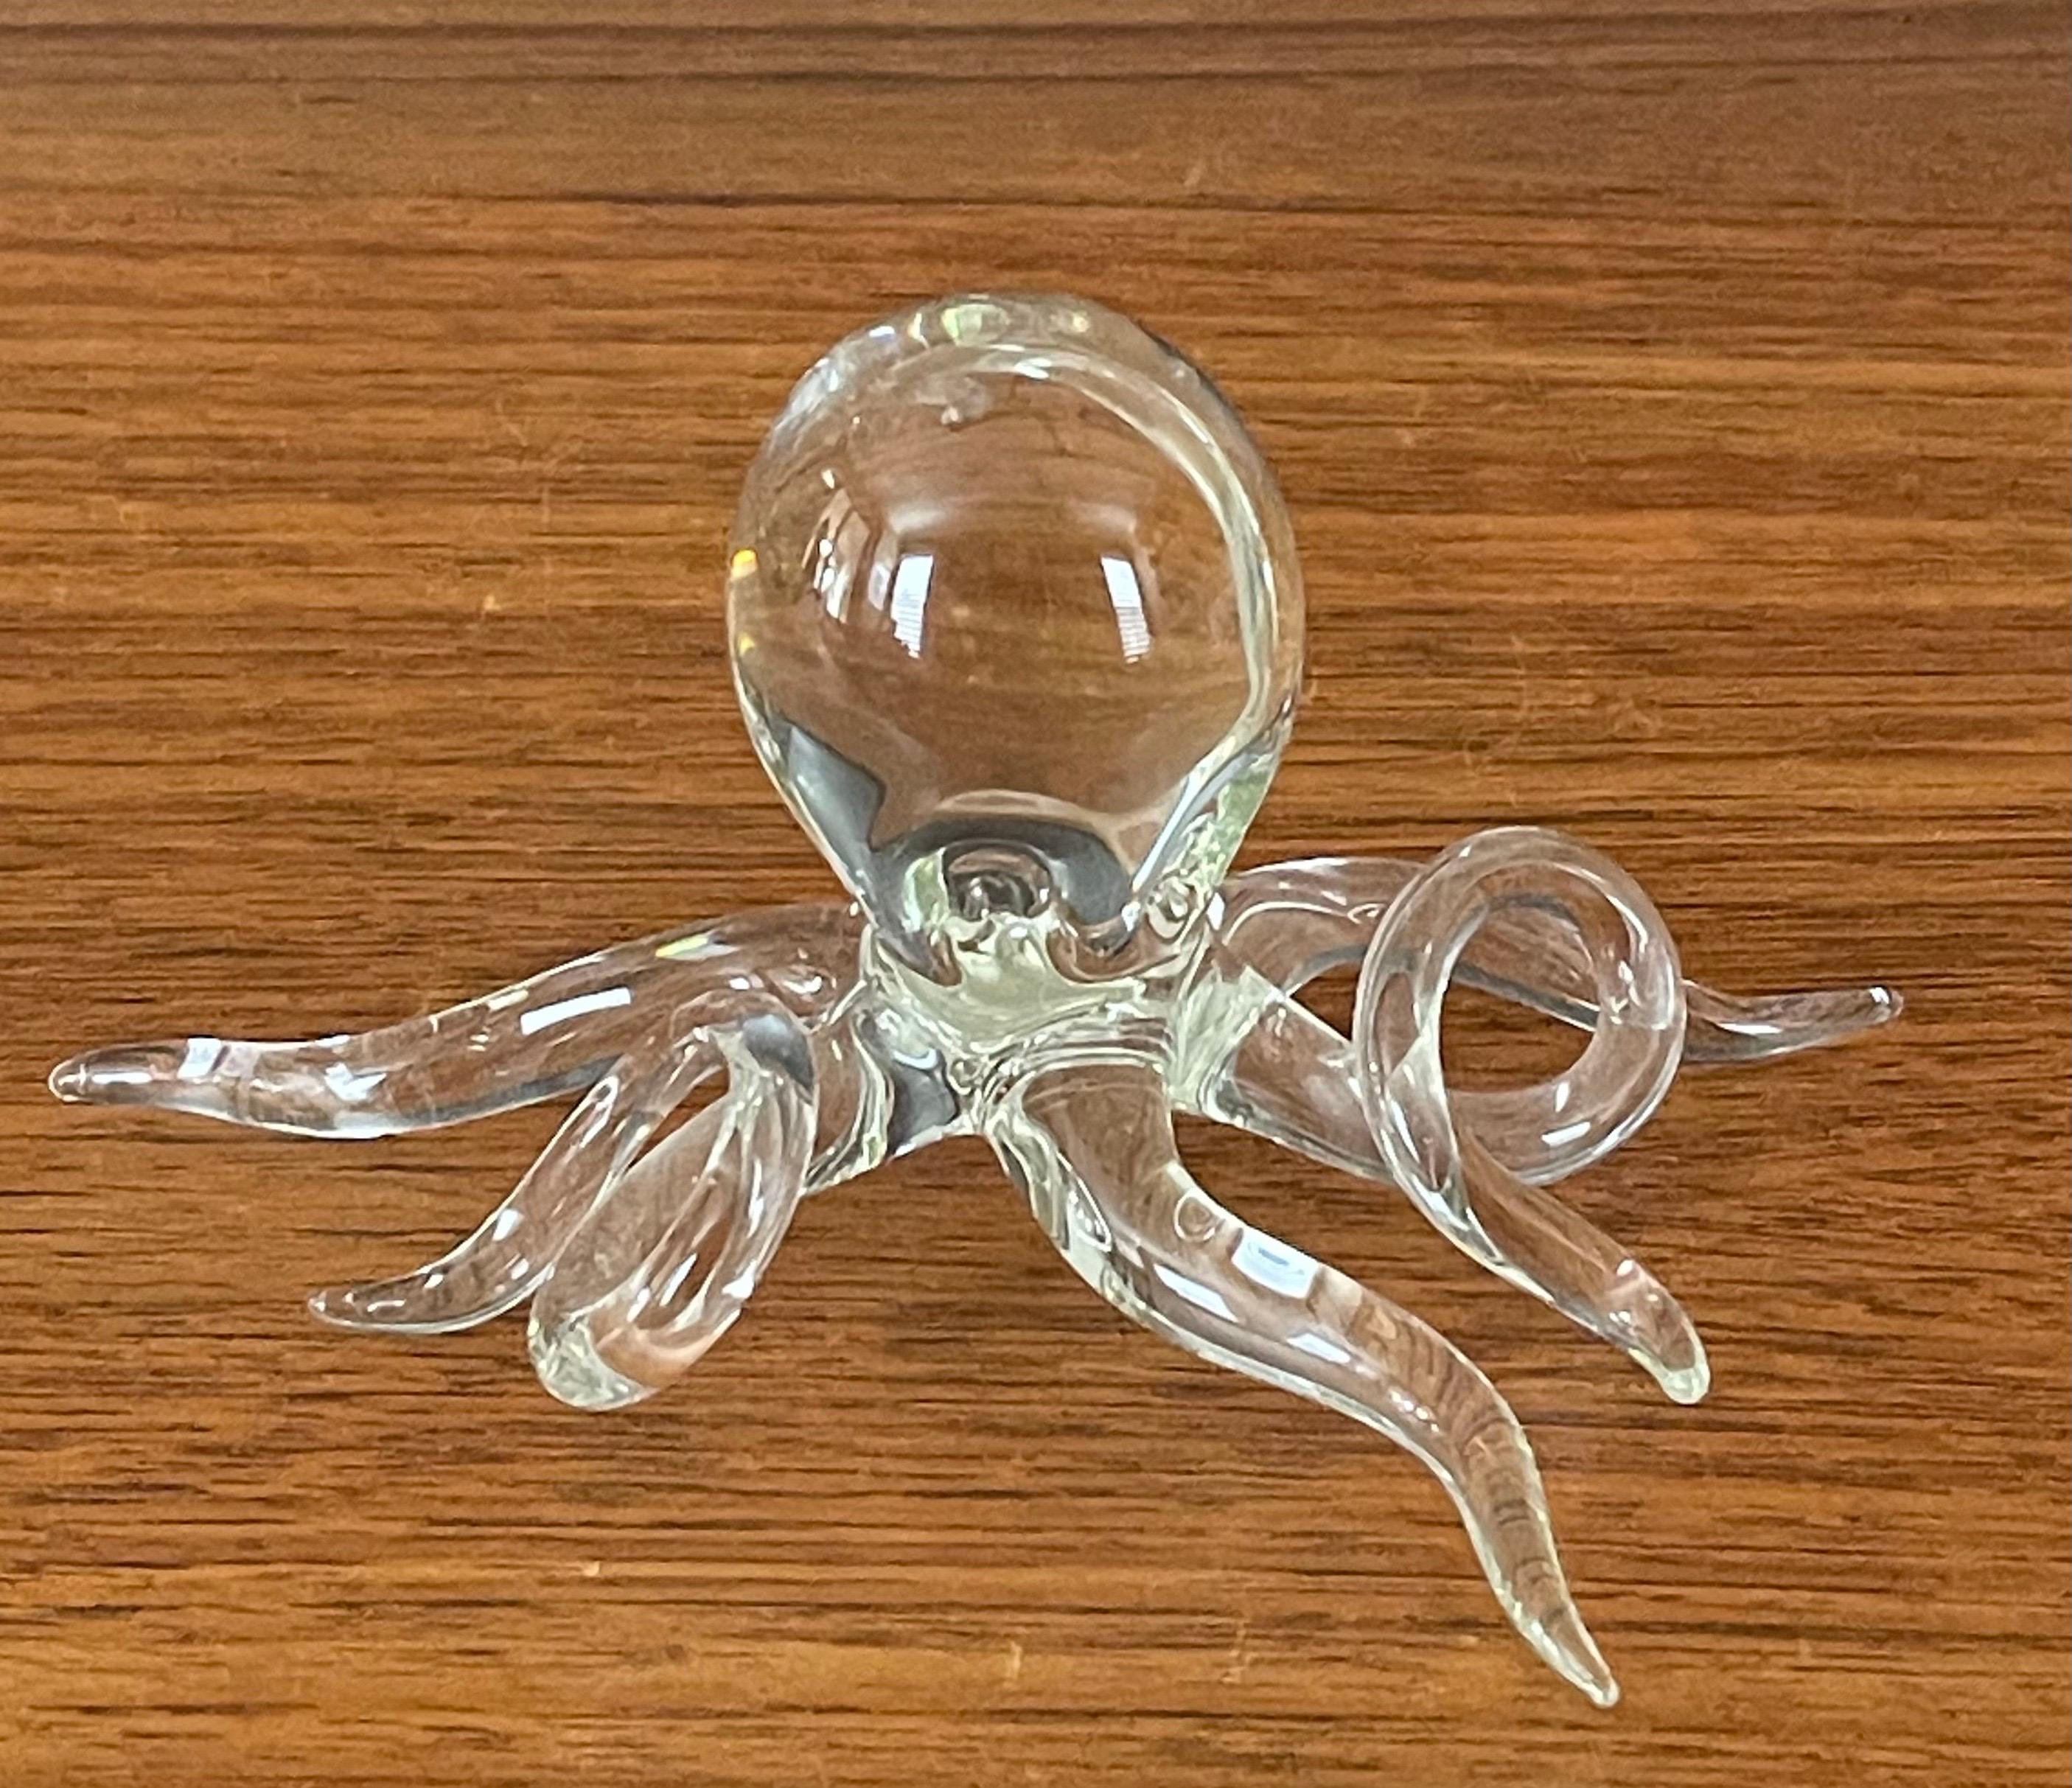 Art glass octopus sculpture by Hans Godo Frabel, circa 1970s. The sculpture is made of clear blown glass and measures 6